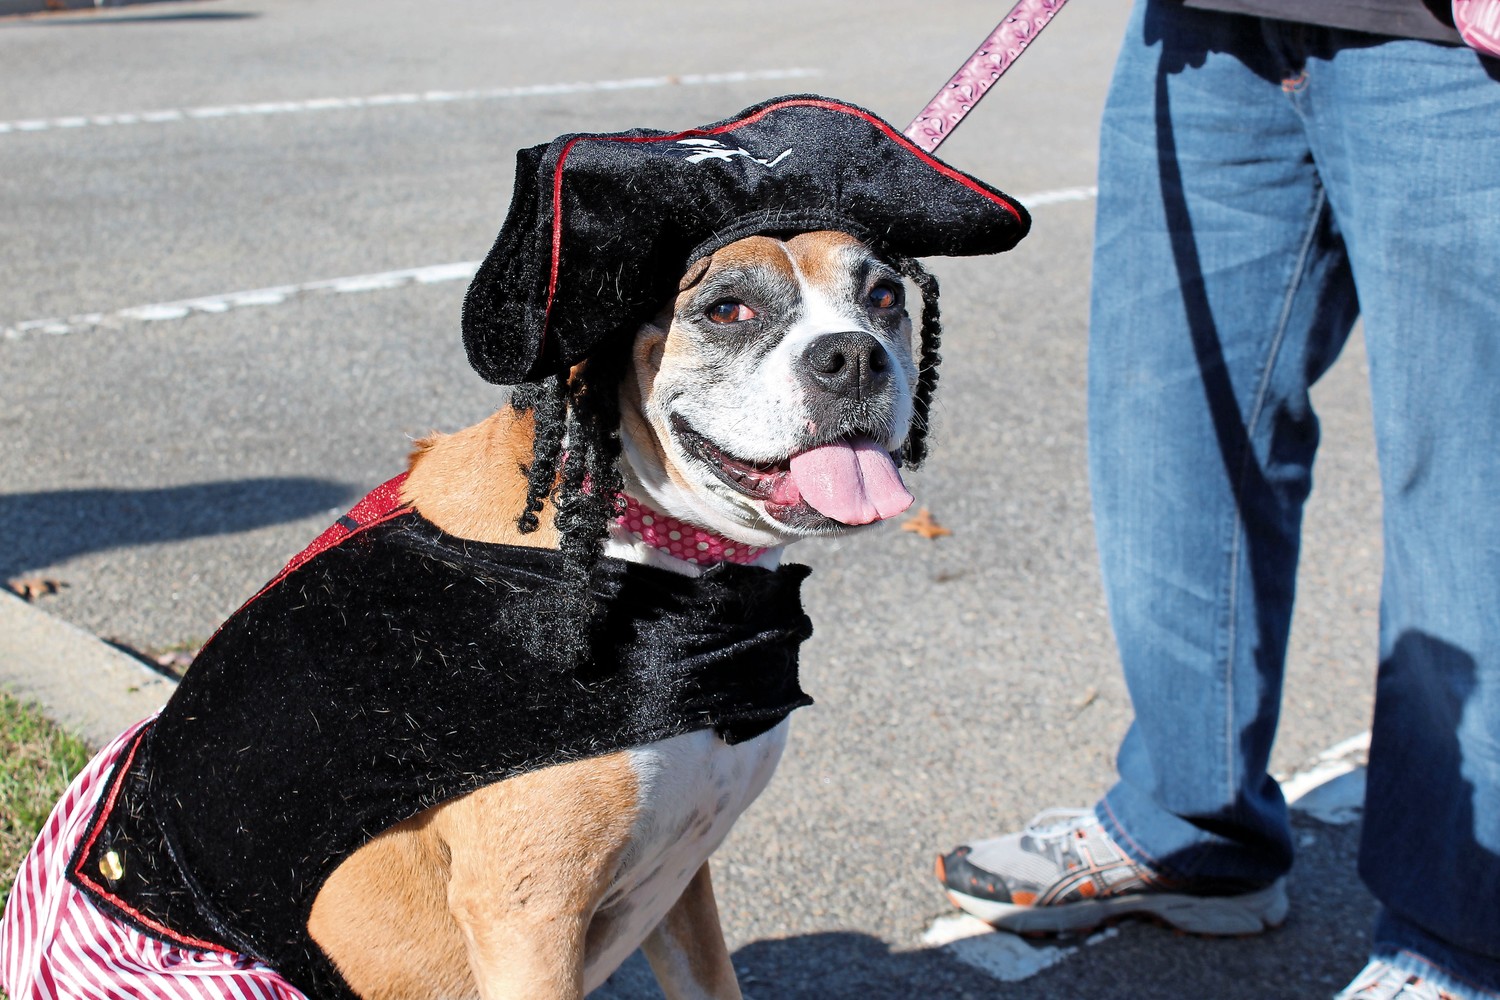 Luna Aceste dressed up as a pirate for the sixth annual ‘Howl-O-Ween’ party.